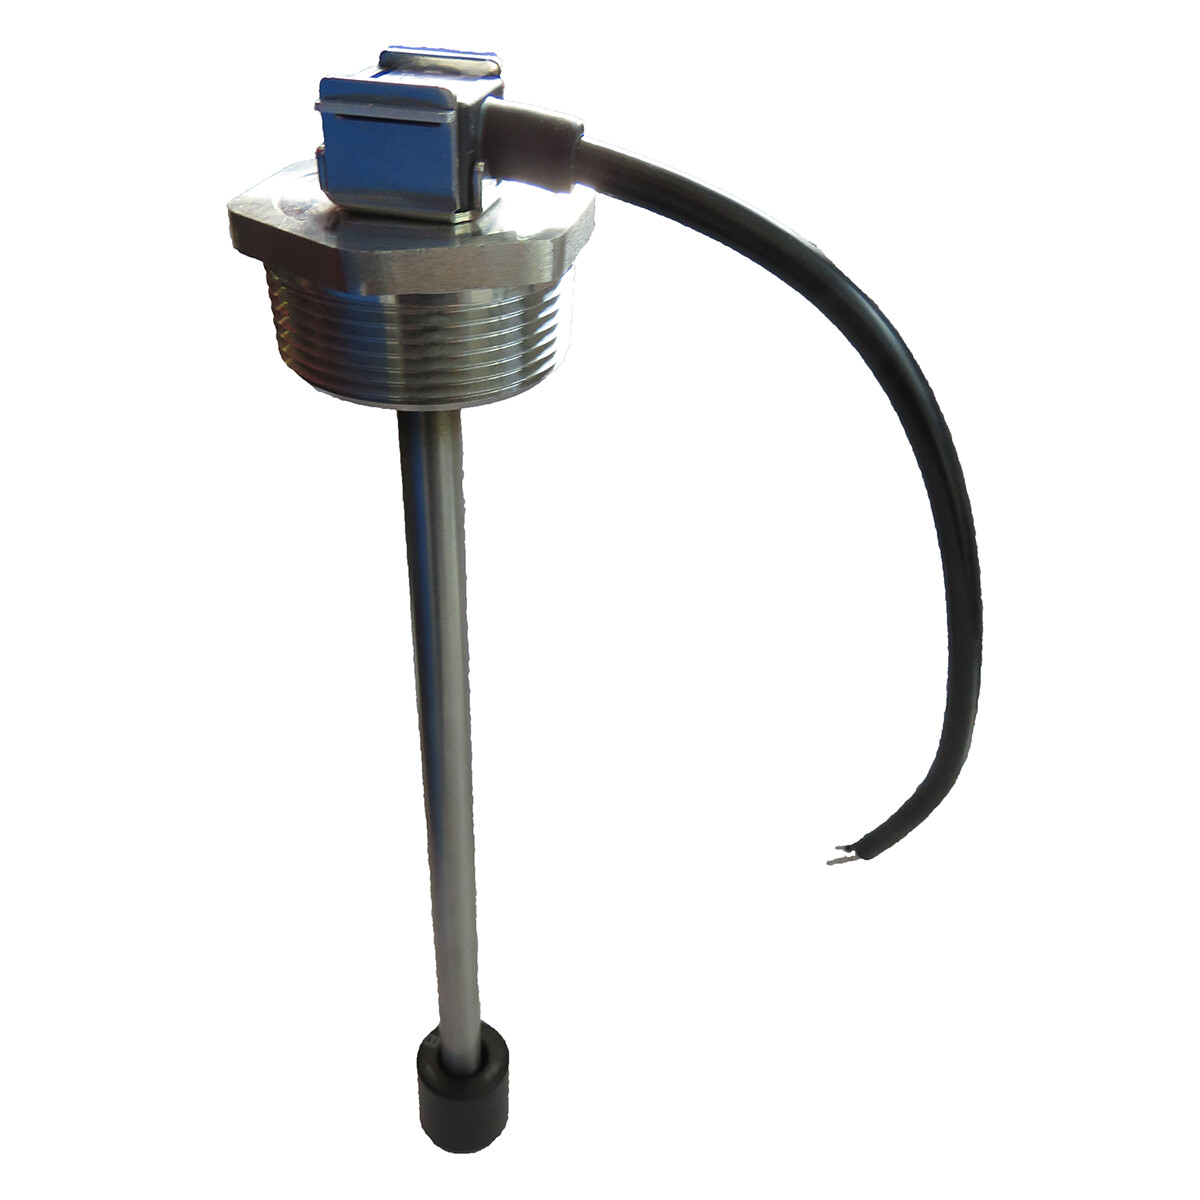 Rochester Sensors 9815-20080 Reed Switch Fuel Level Sender 8"L x 1.5" NPTF, 240-30 ohm Output